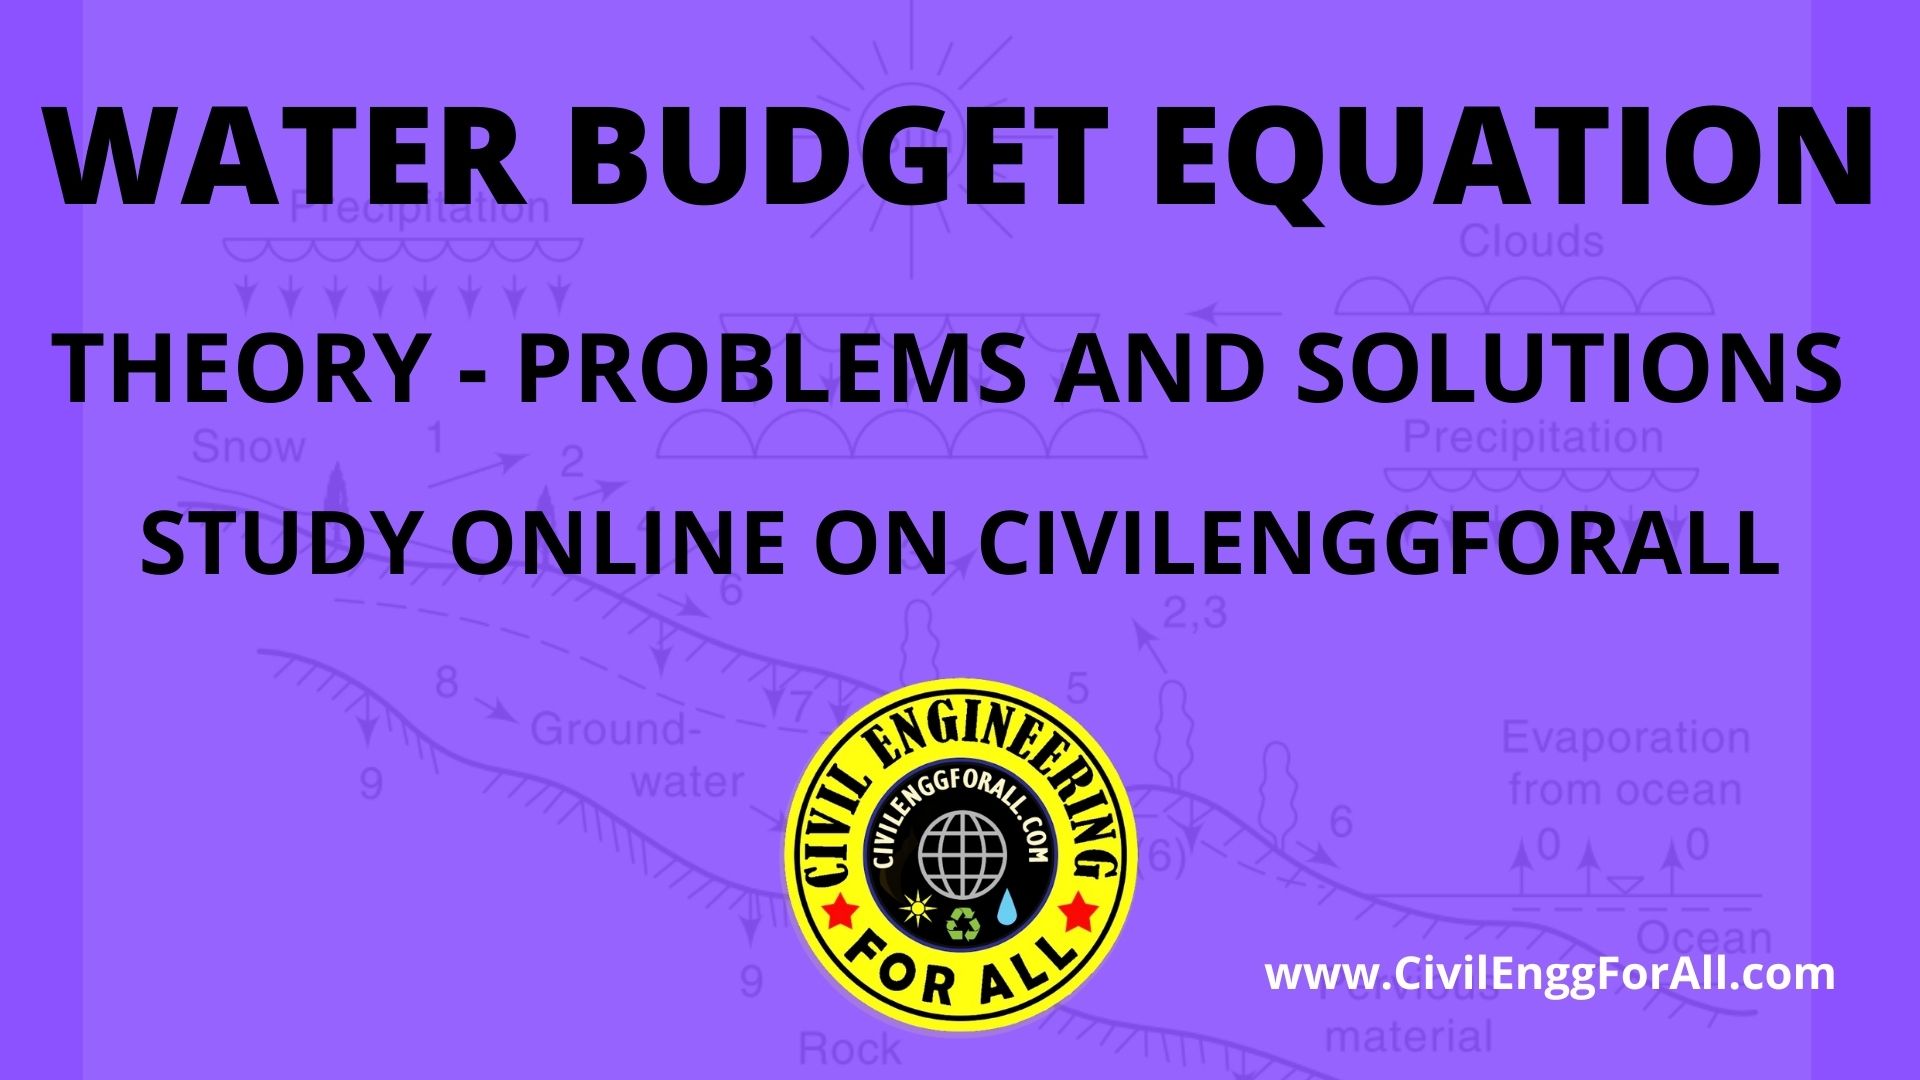 WATER BUDGET EQUATION - THEORY - PROBLEMS AND SOLUTIONS